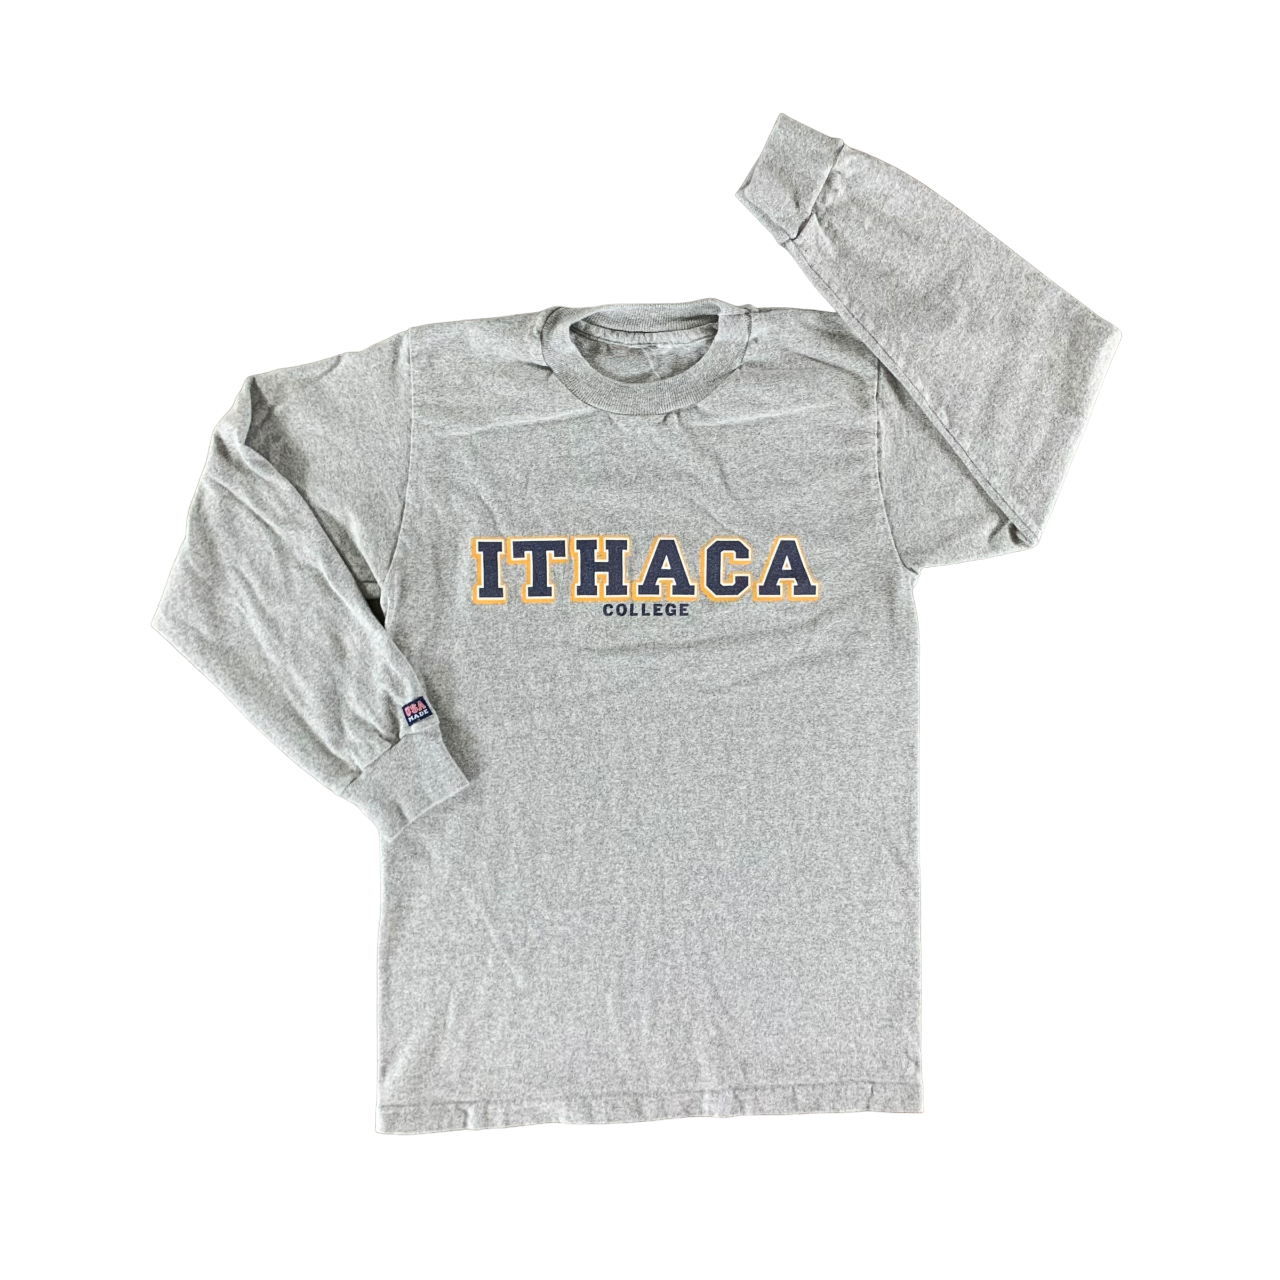 Vintage 1990s Ithaca College T-shirt size Large